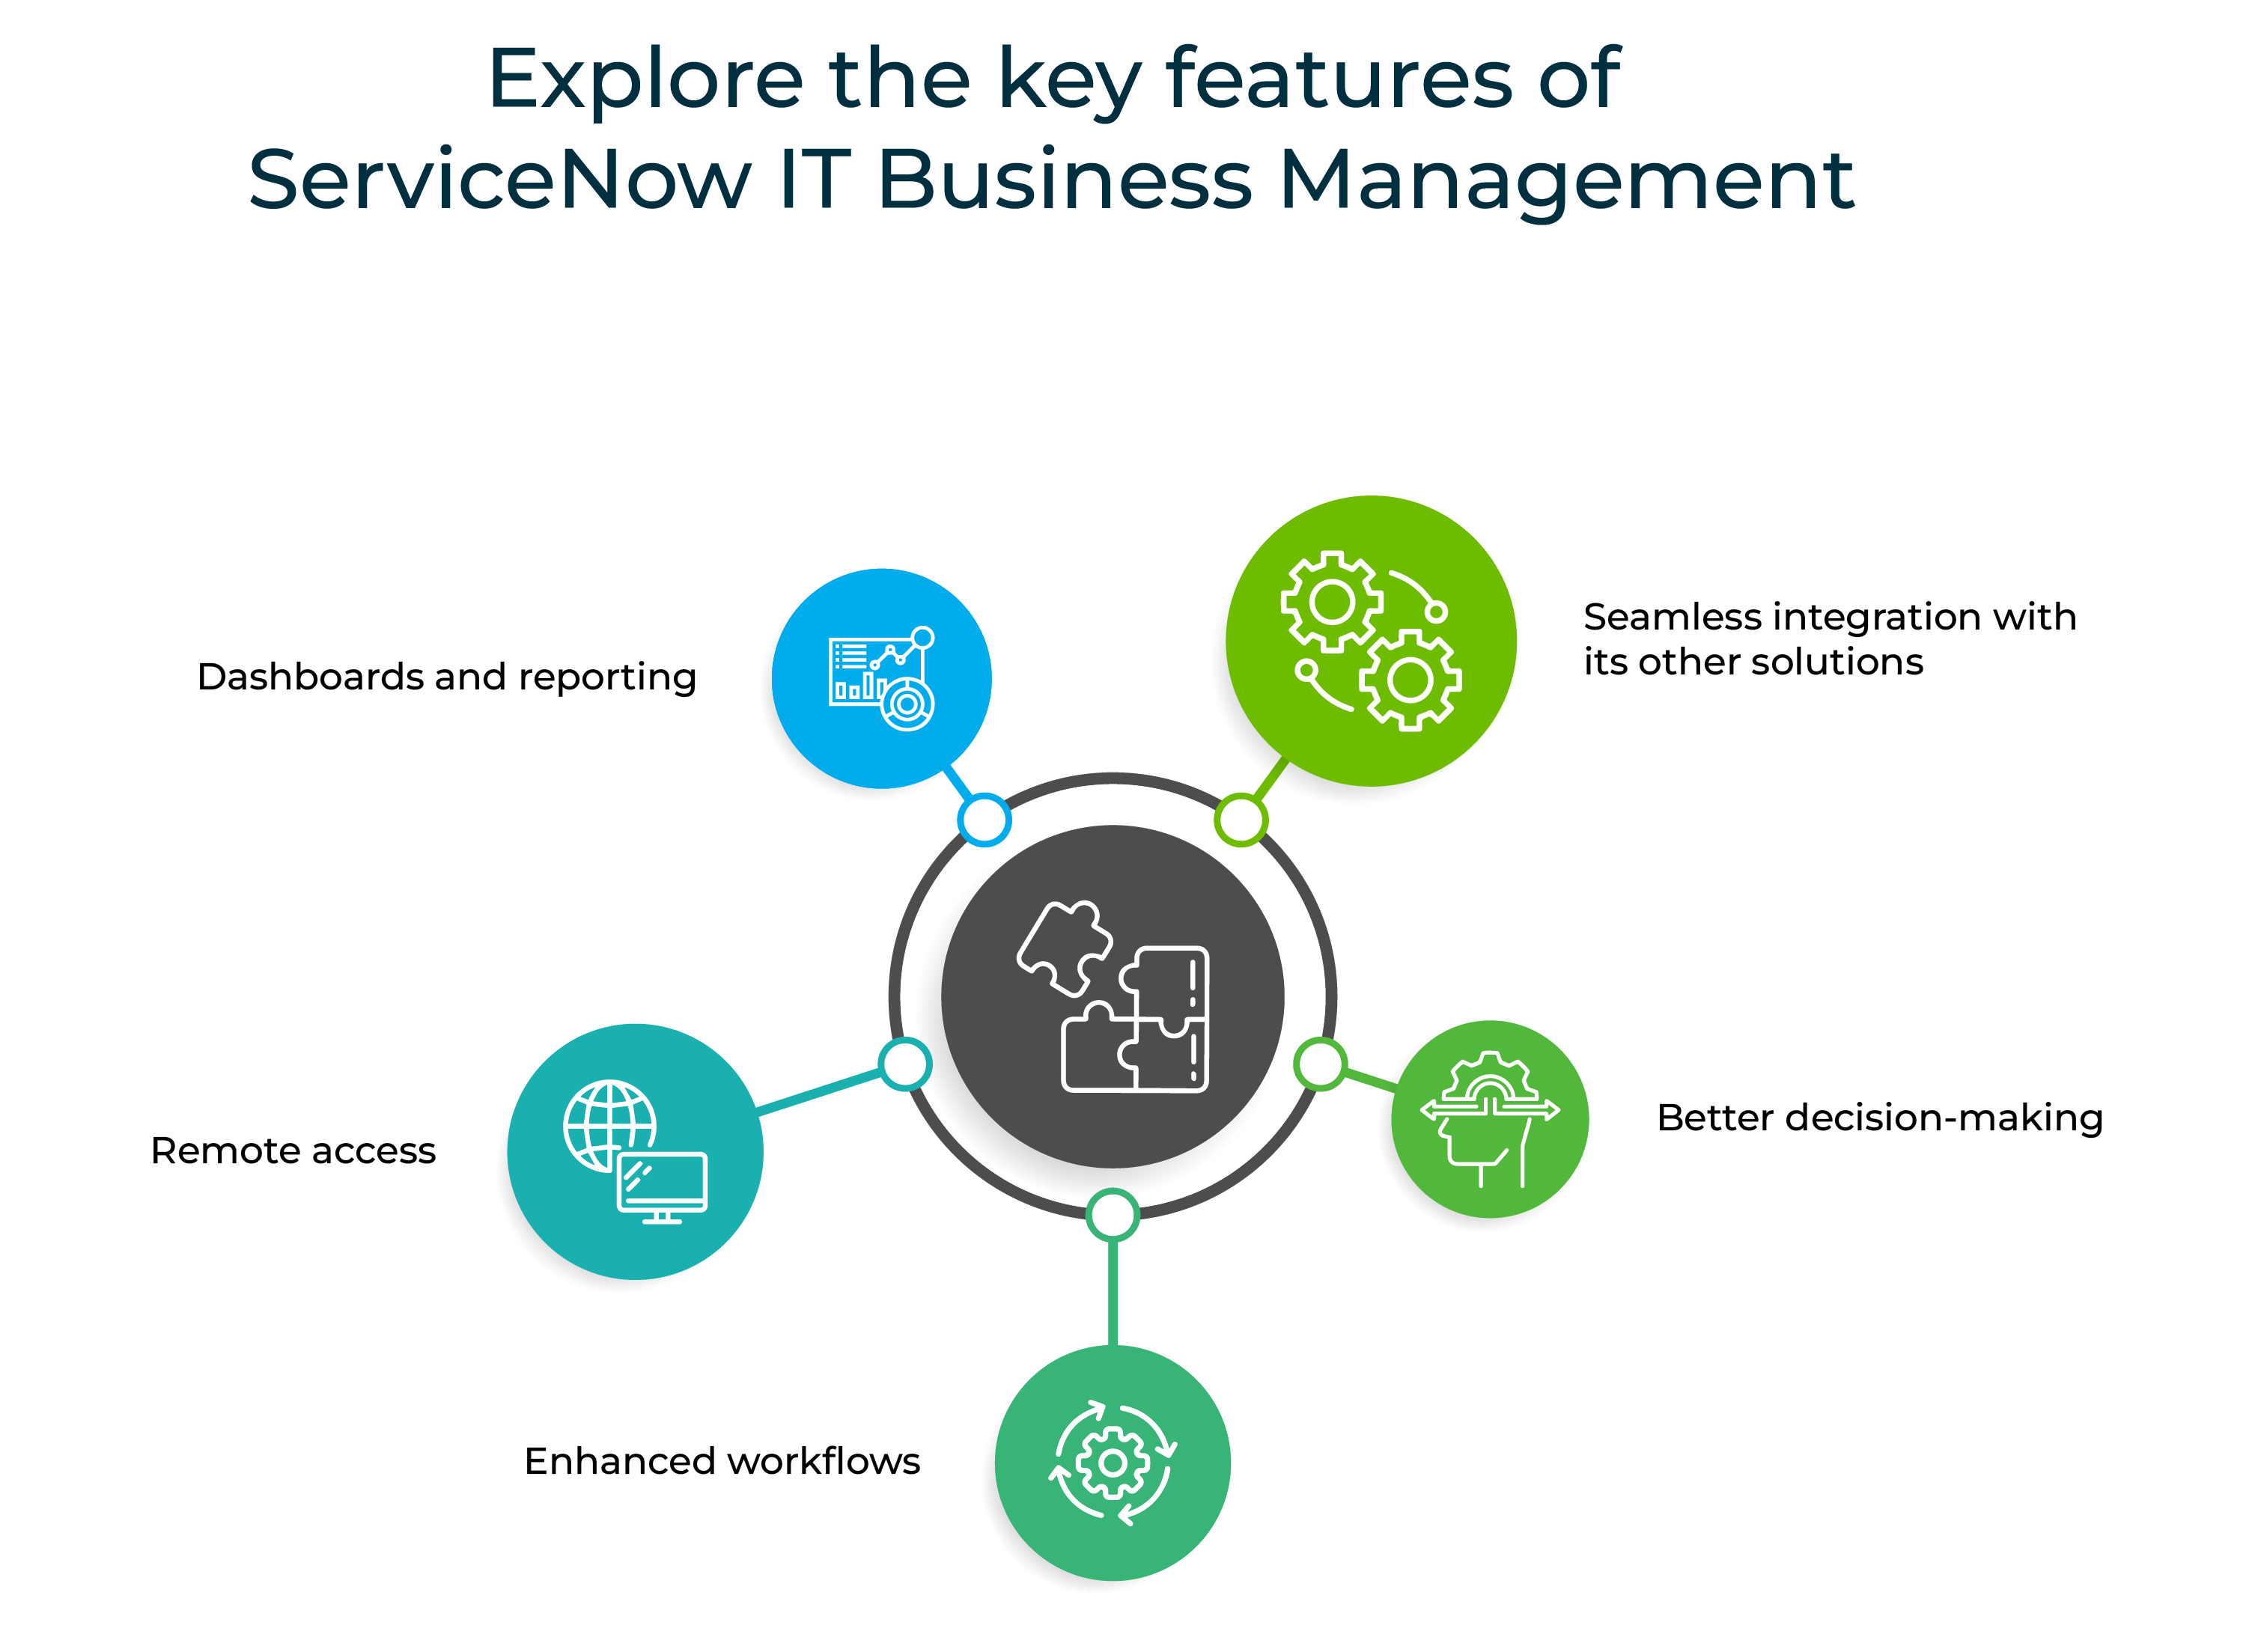 Explore the key features of ServiceNow IT Business Management